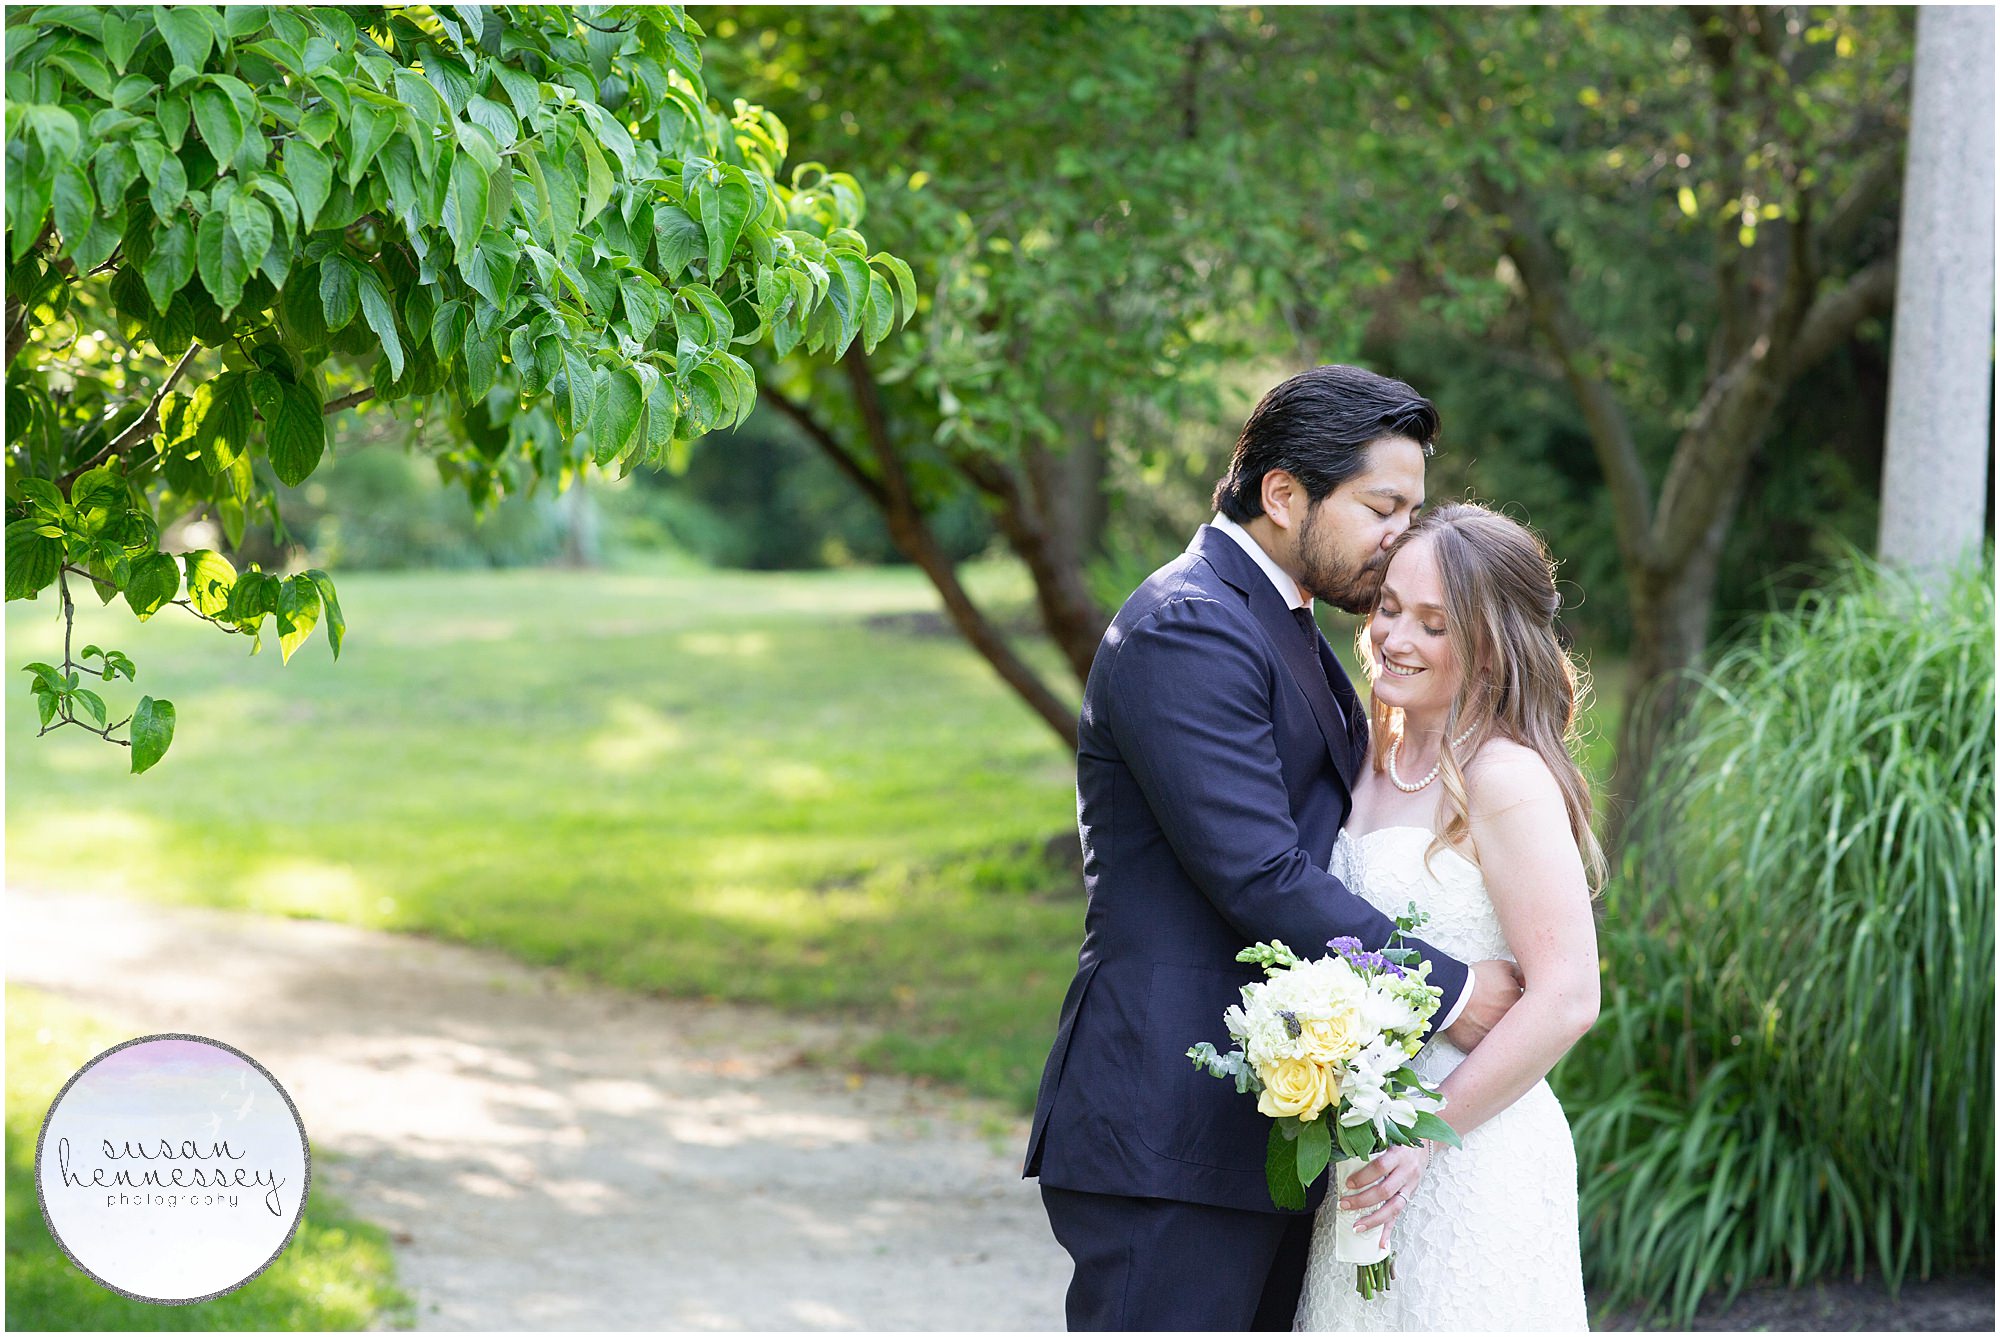 Sayen gardens in Hamilton, NJ is the perfect location for an intimate wedding